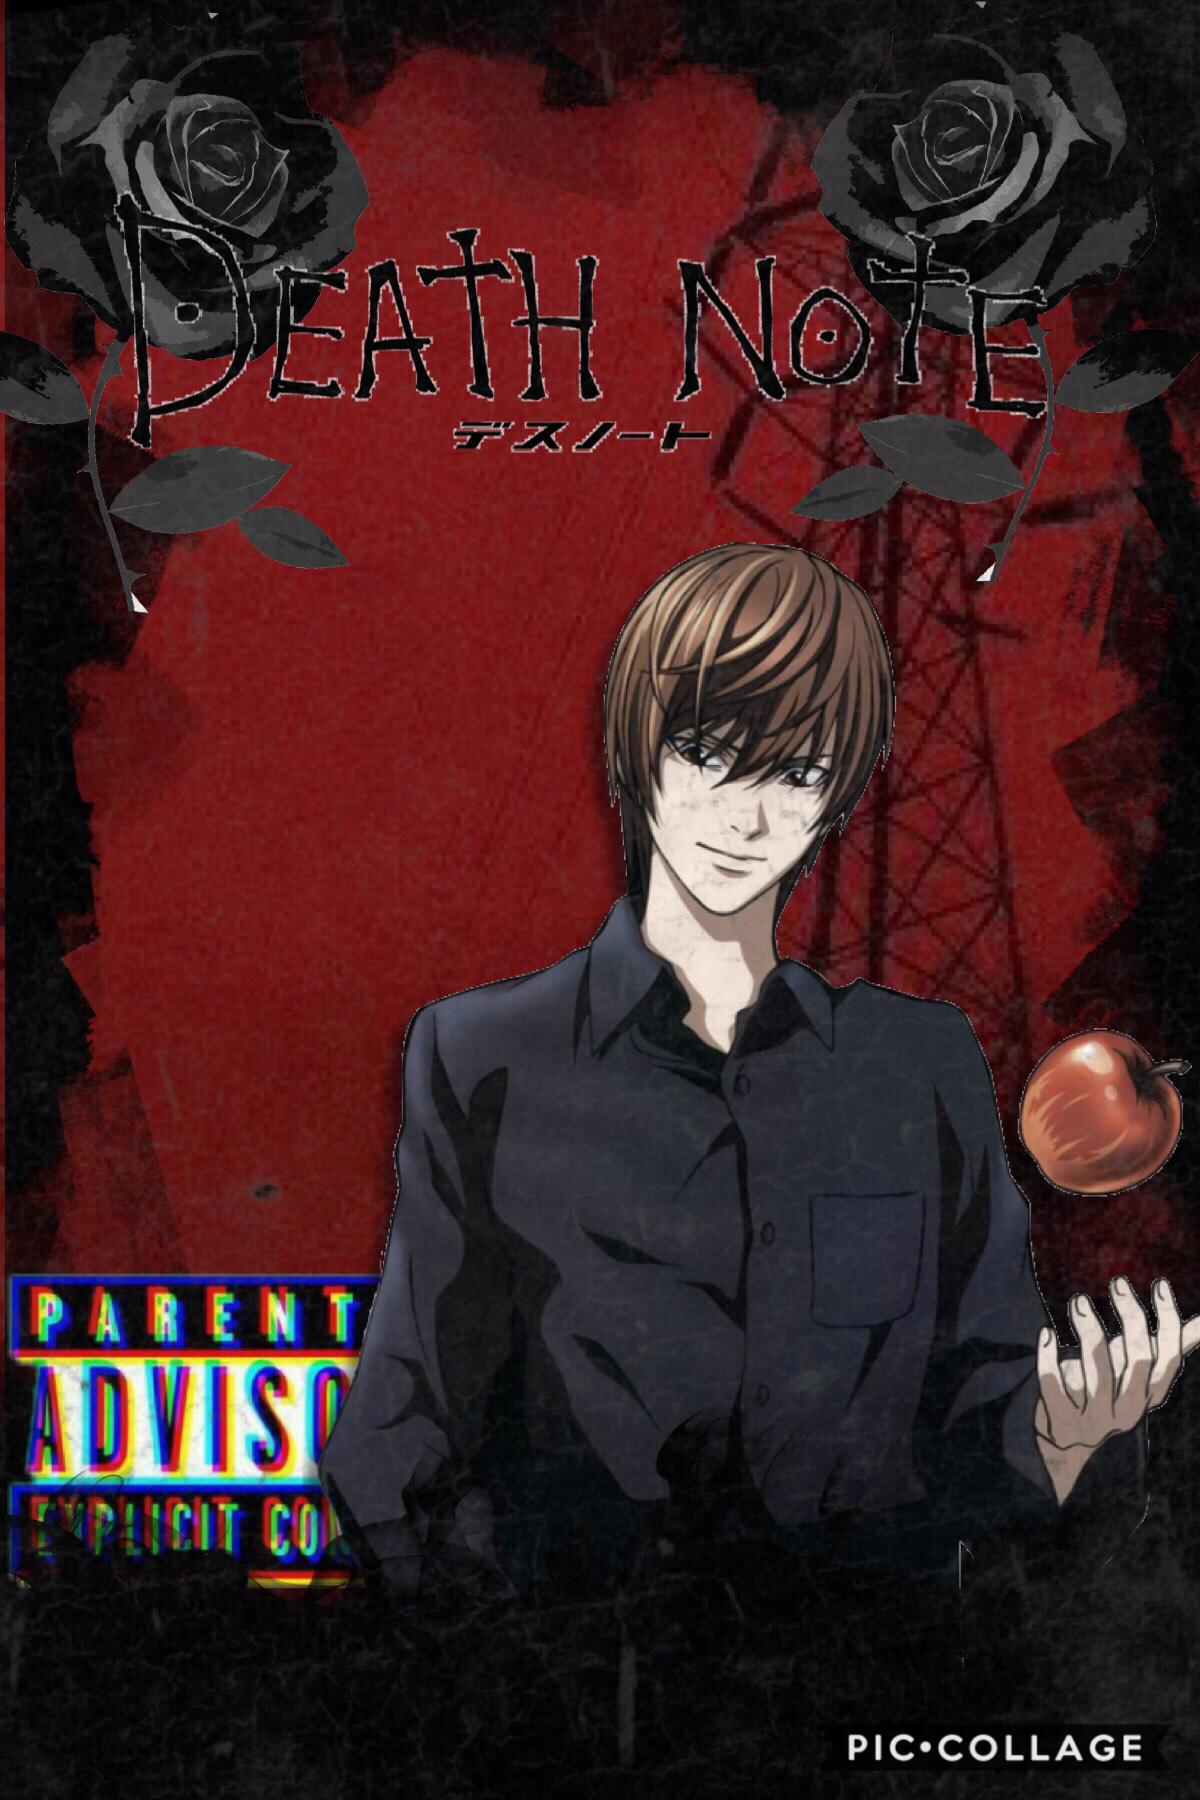 Tap💀(also edit dump in remixes)
“Do you know death gods like apples?” 
Just finished reading all of death note(my friend got me the all-in-one edition) and sorry but TEAM LIGHT! I was lowkey rooting for him at the end... 
